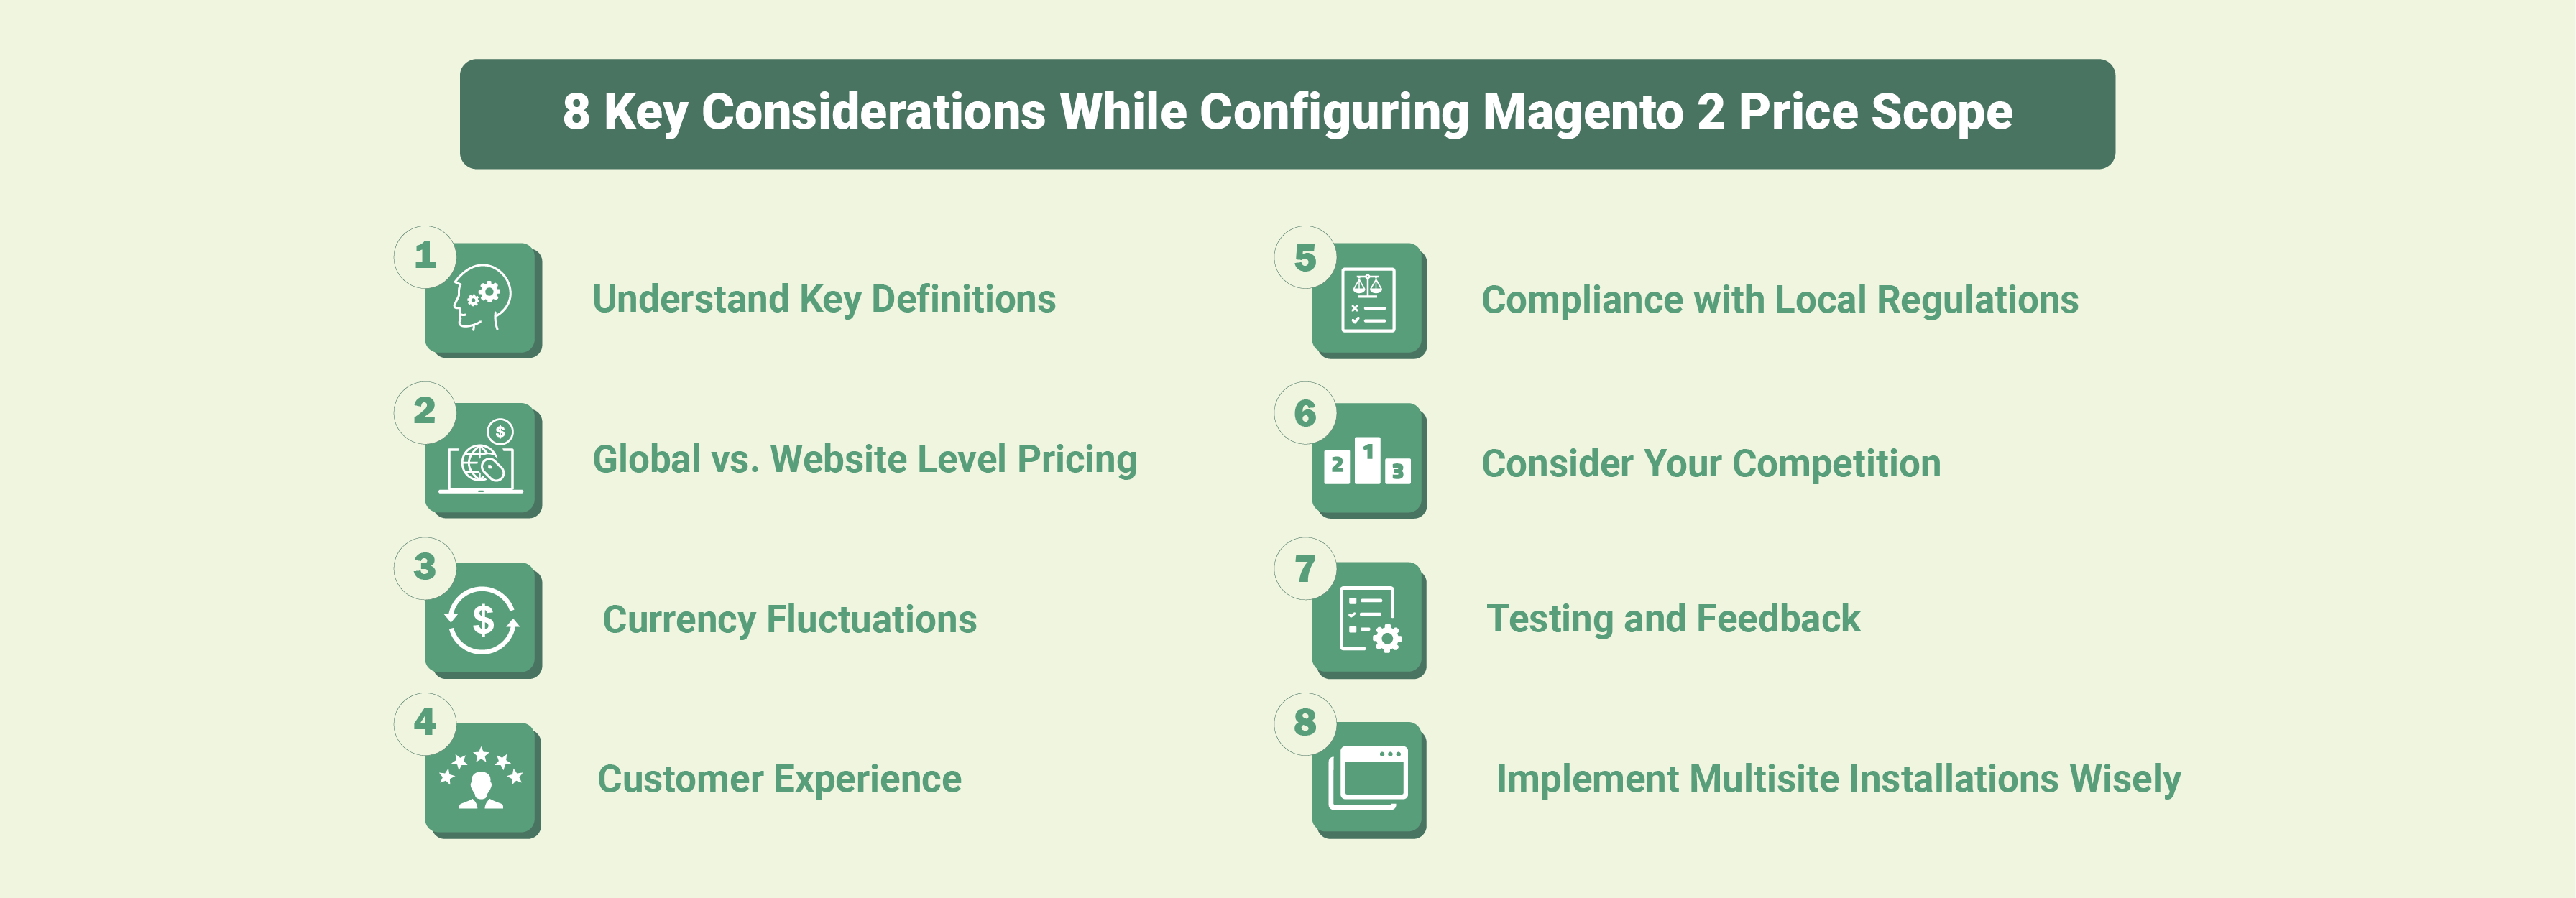 Key considerations for configuring Magento 2 price scope to enhance e-commerce effectiveness